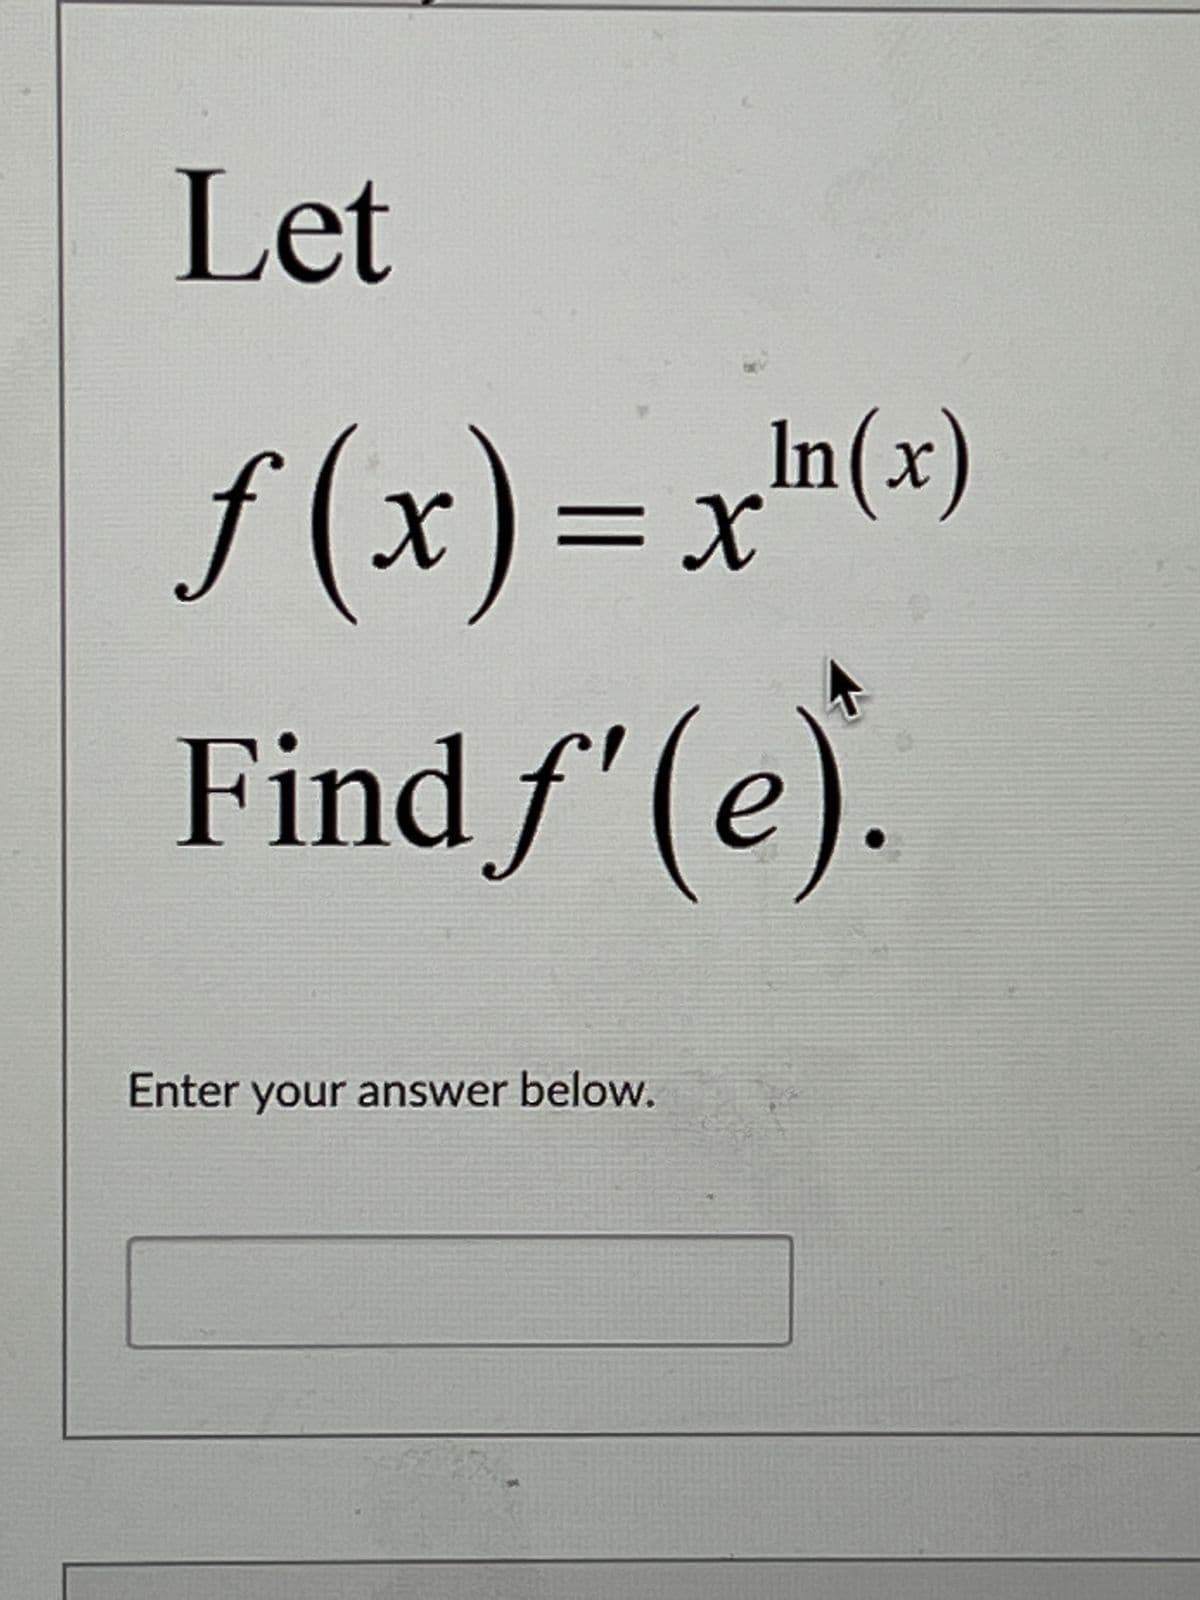 Let
f(x) = x²(x)
Find f'(e).
Enter your answer below.